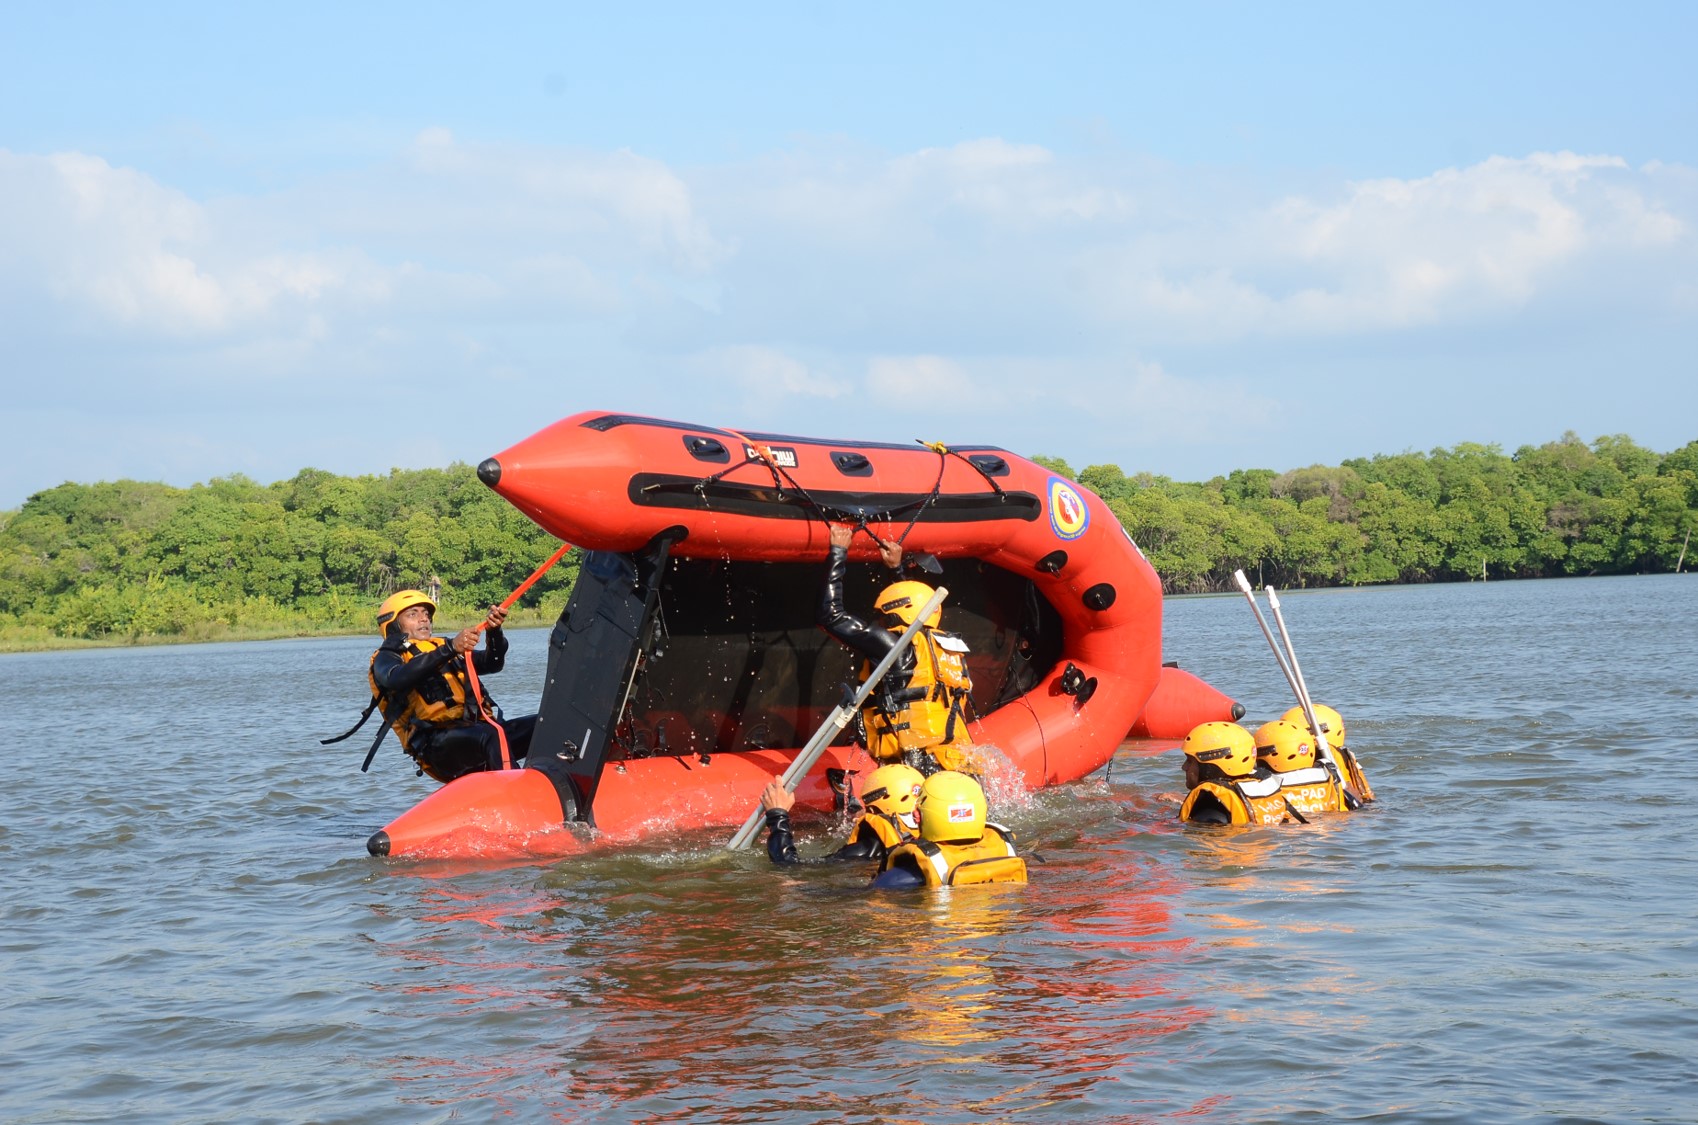 The Asia-Pacific Alliance for Disaster Management - Sri Lanka (A PAD-SL), a Connecting Business initiative Member Network conducted a training on search and rescue in swift waters.